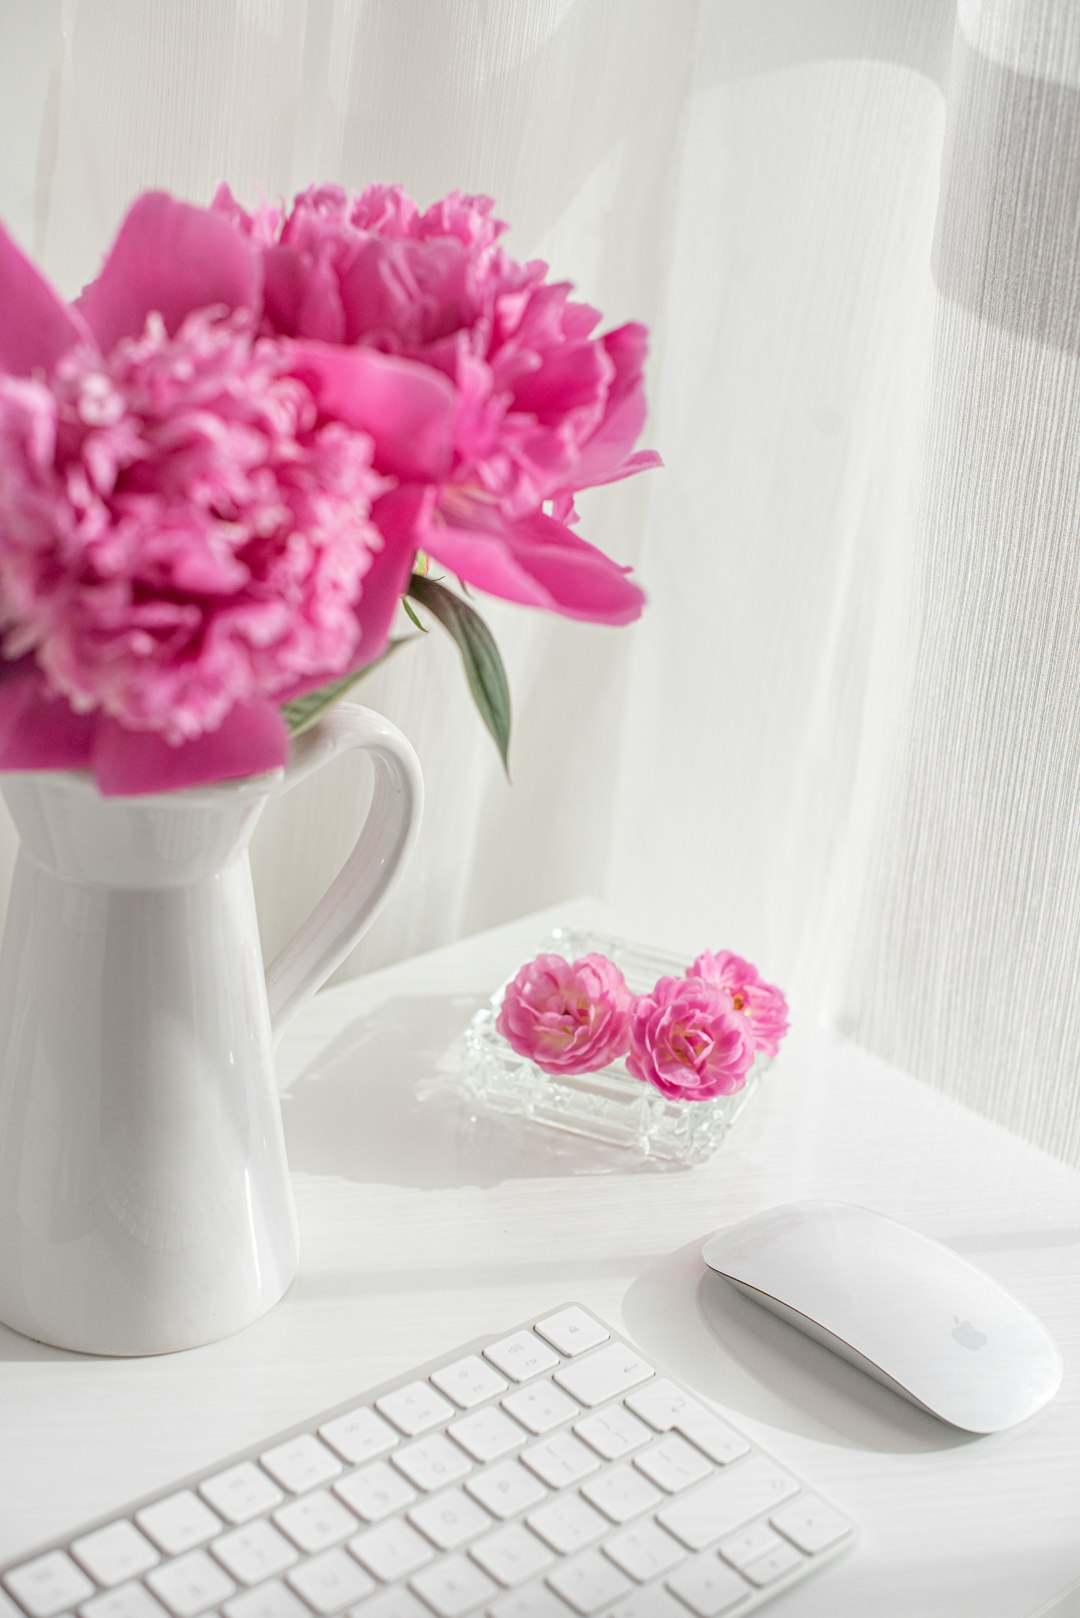 pink flowers in white ceramic vase on table